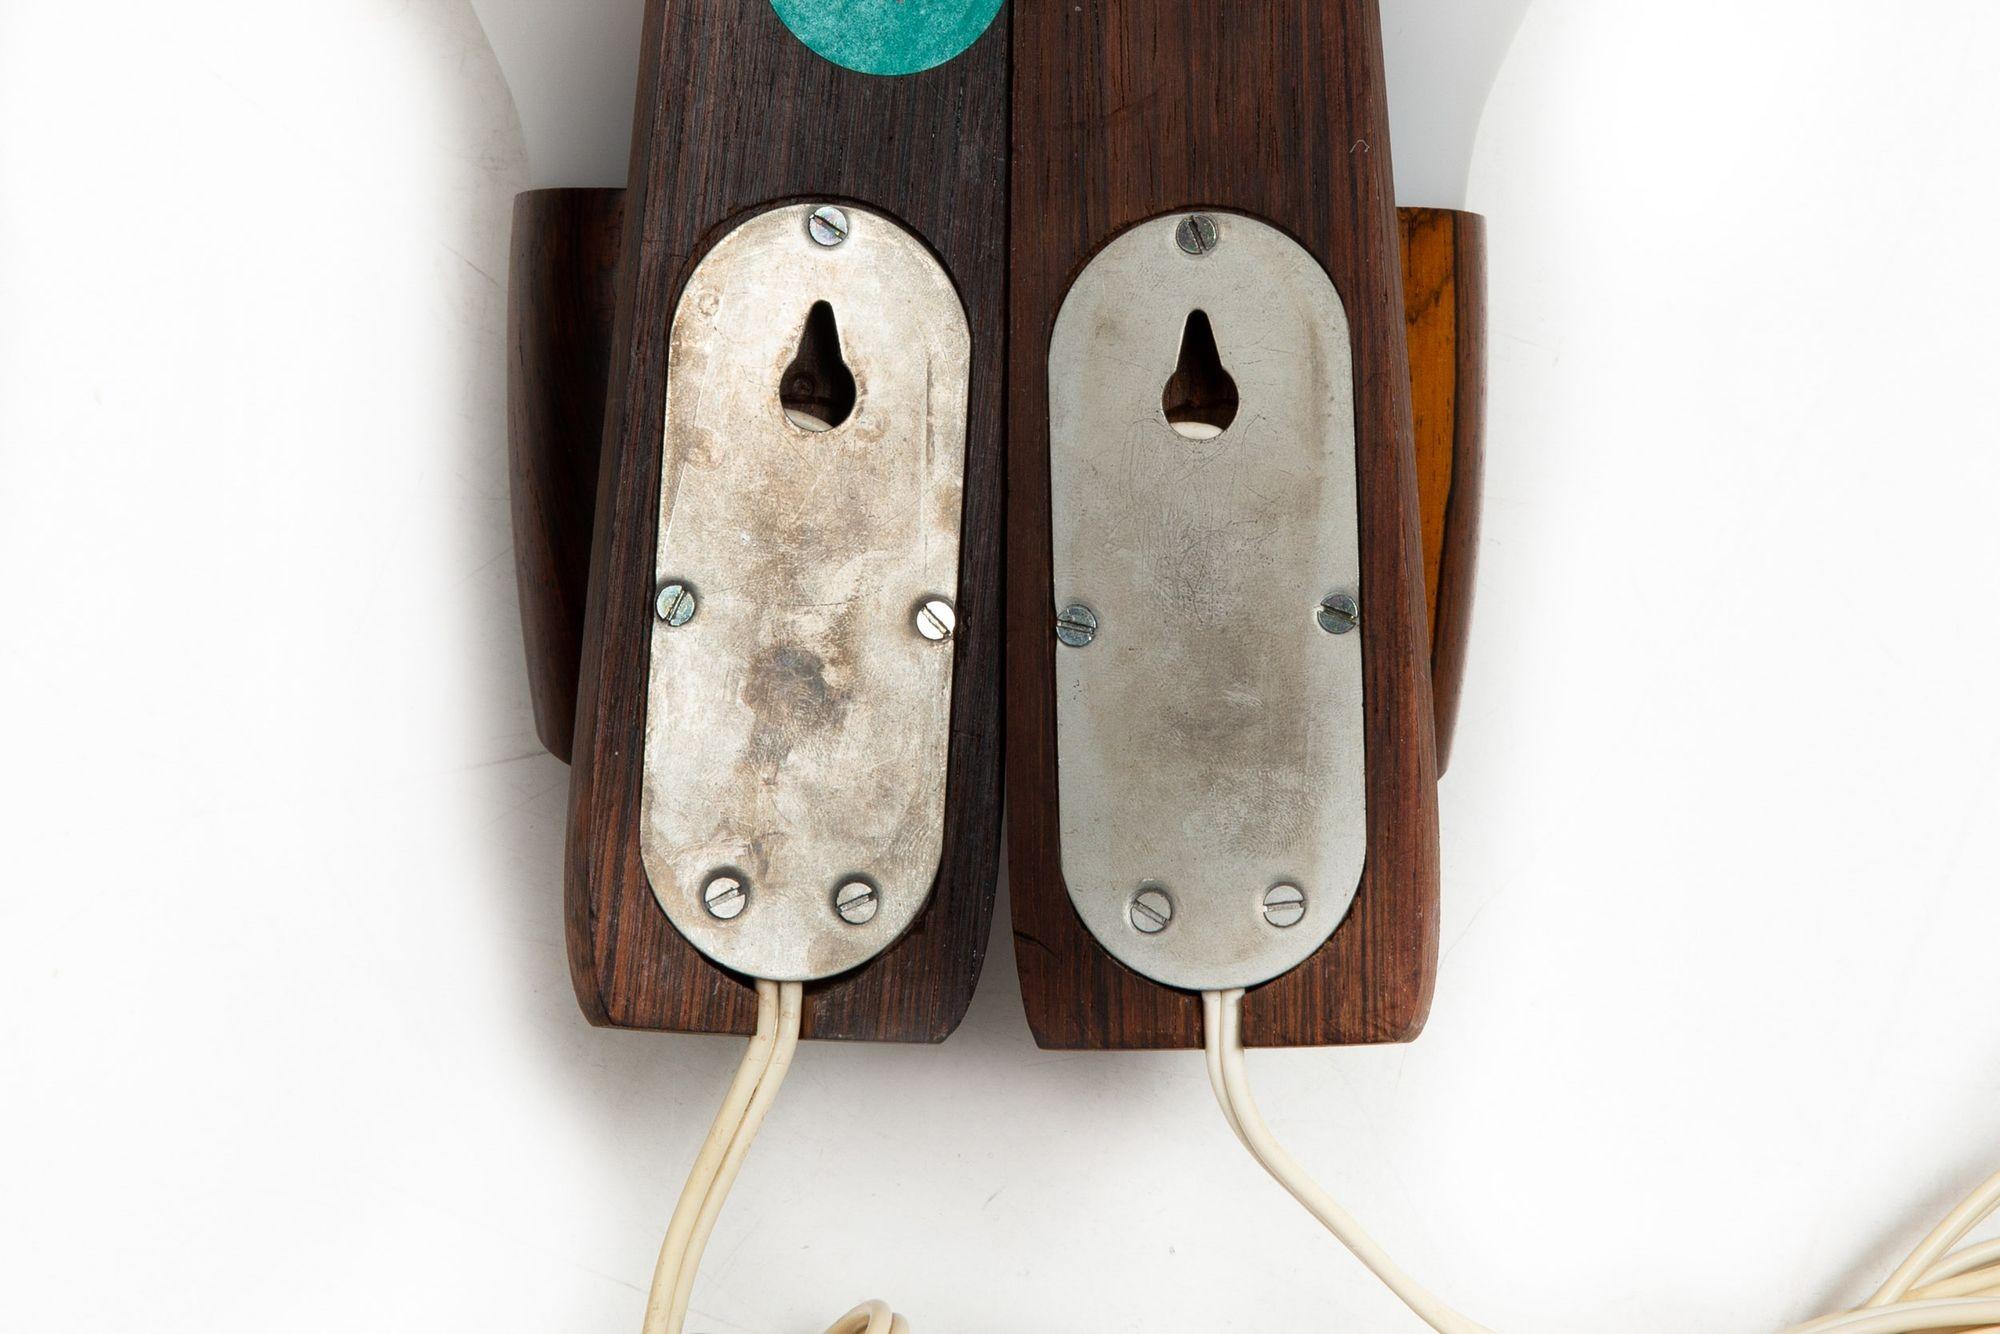 Pair of Danish Modern Rosewood Wall Sconces by Vitrika circa 1970s For Sale 3